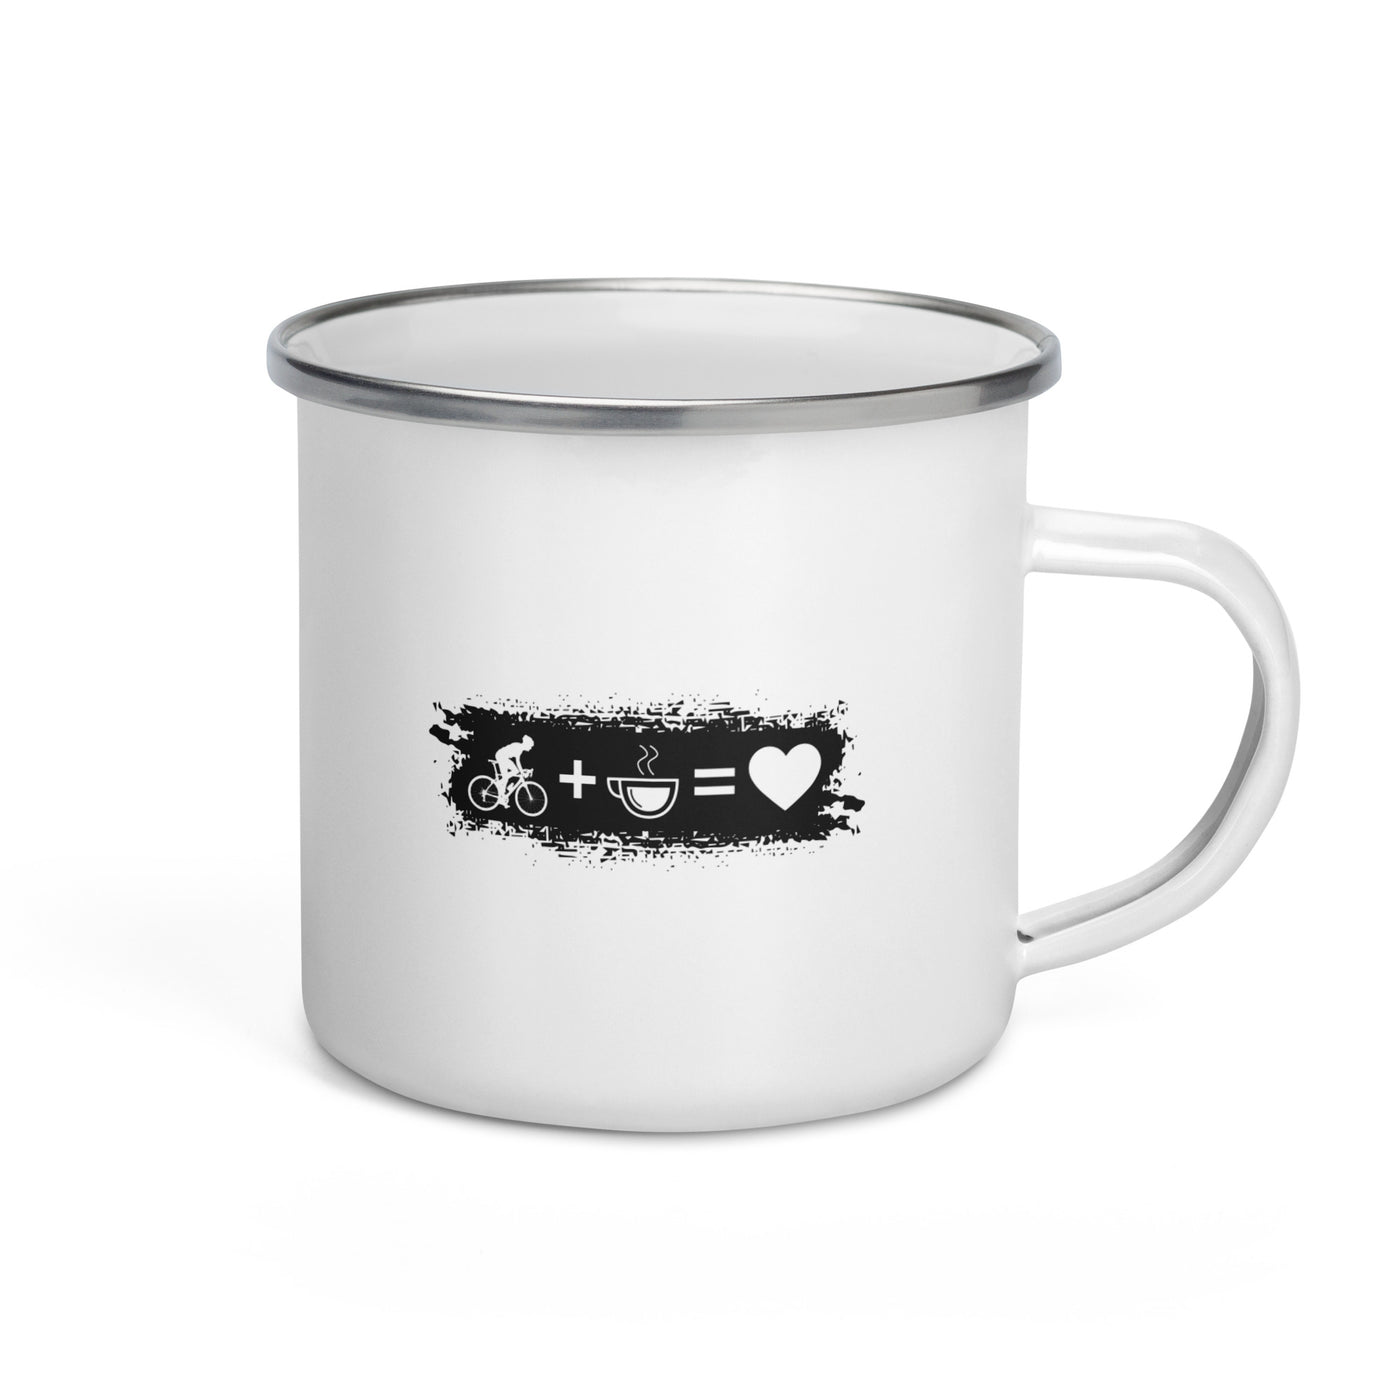 Grunge Rectangle - Heart - Coffee - Man Cycling - Emaille Tasse fahrrad Default Title